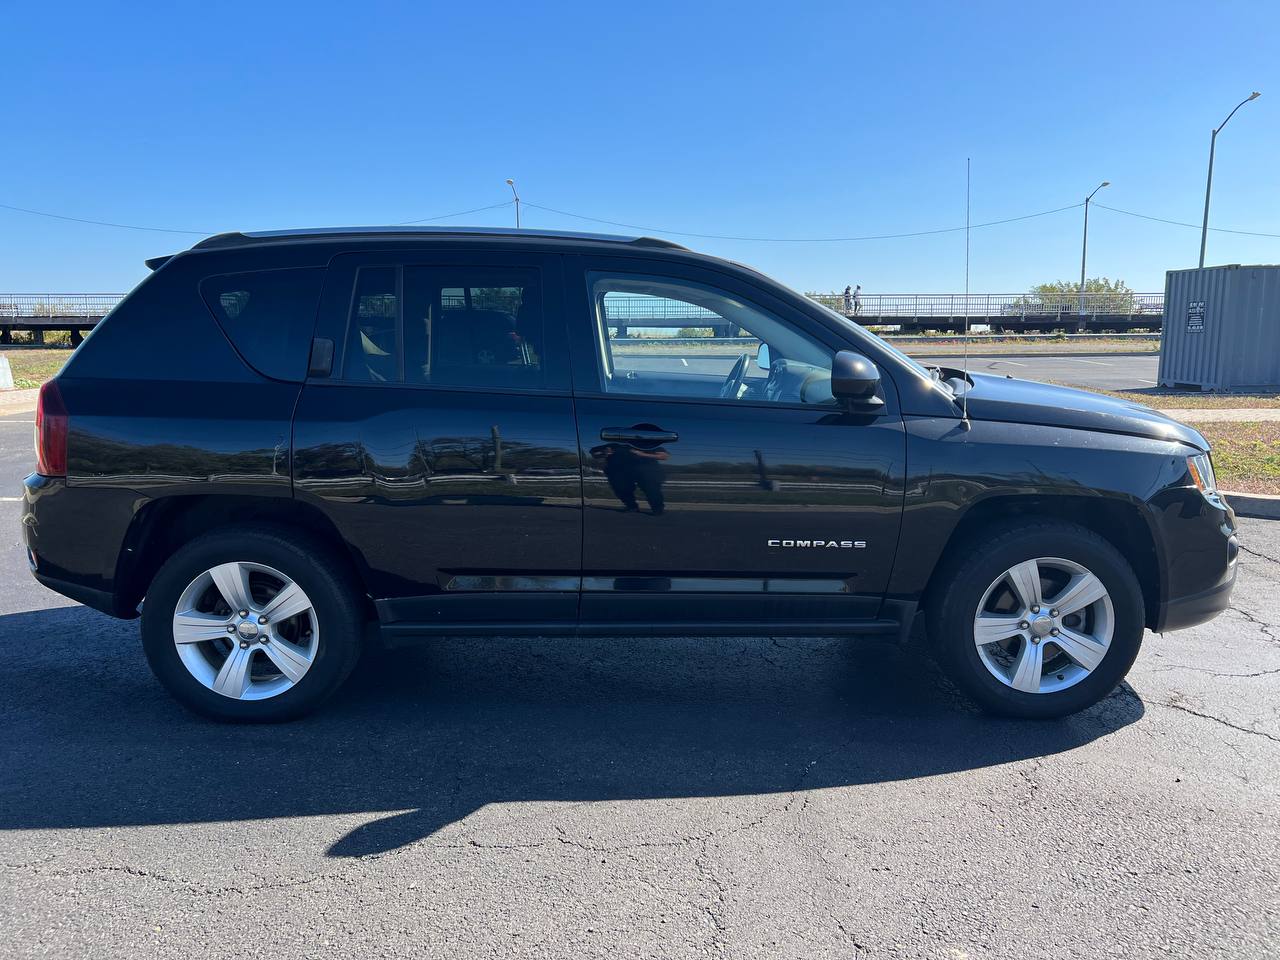 Used - Jeep Compass Latitude 4x4 SUV for sale in Staten Island NY